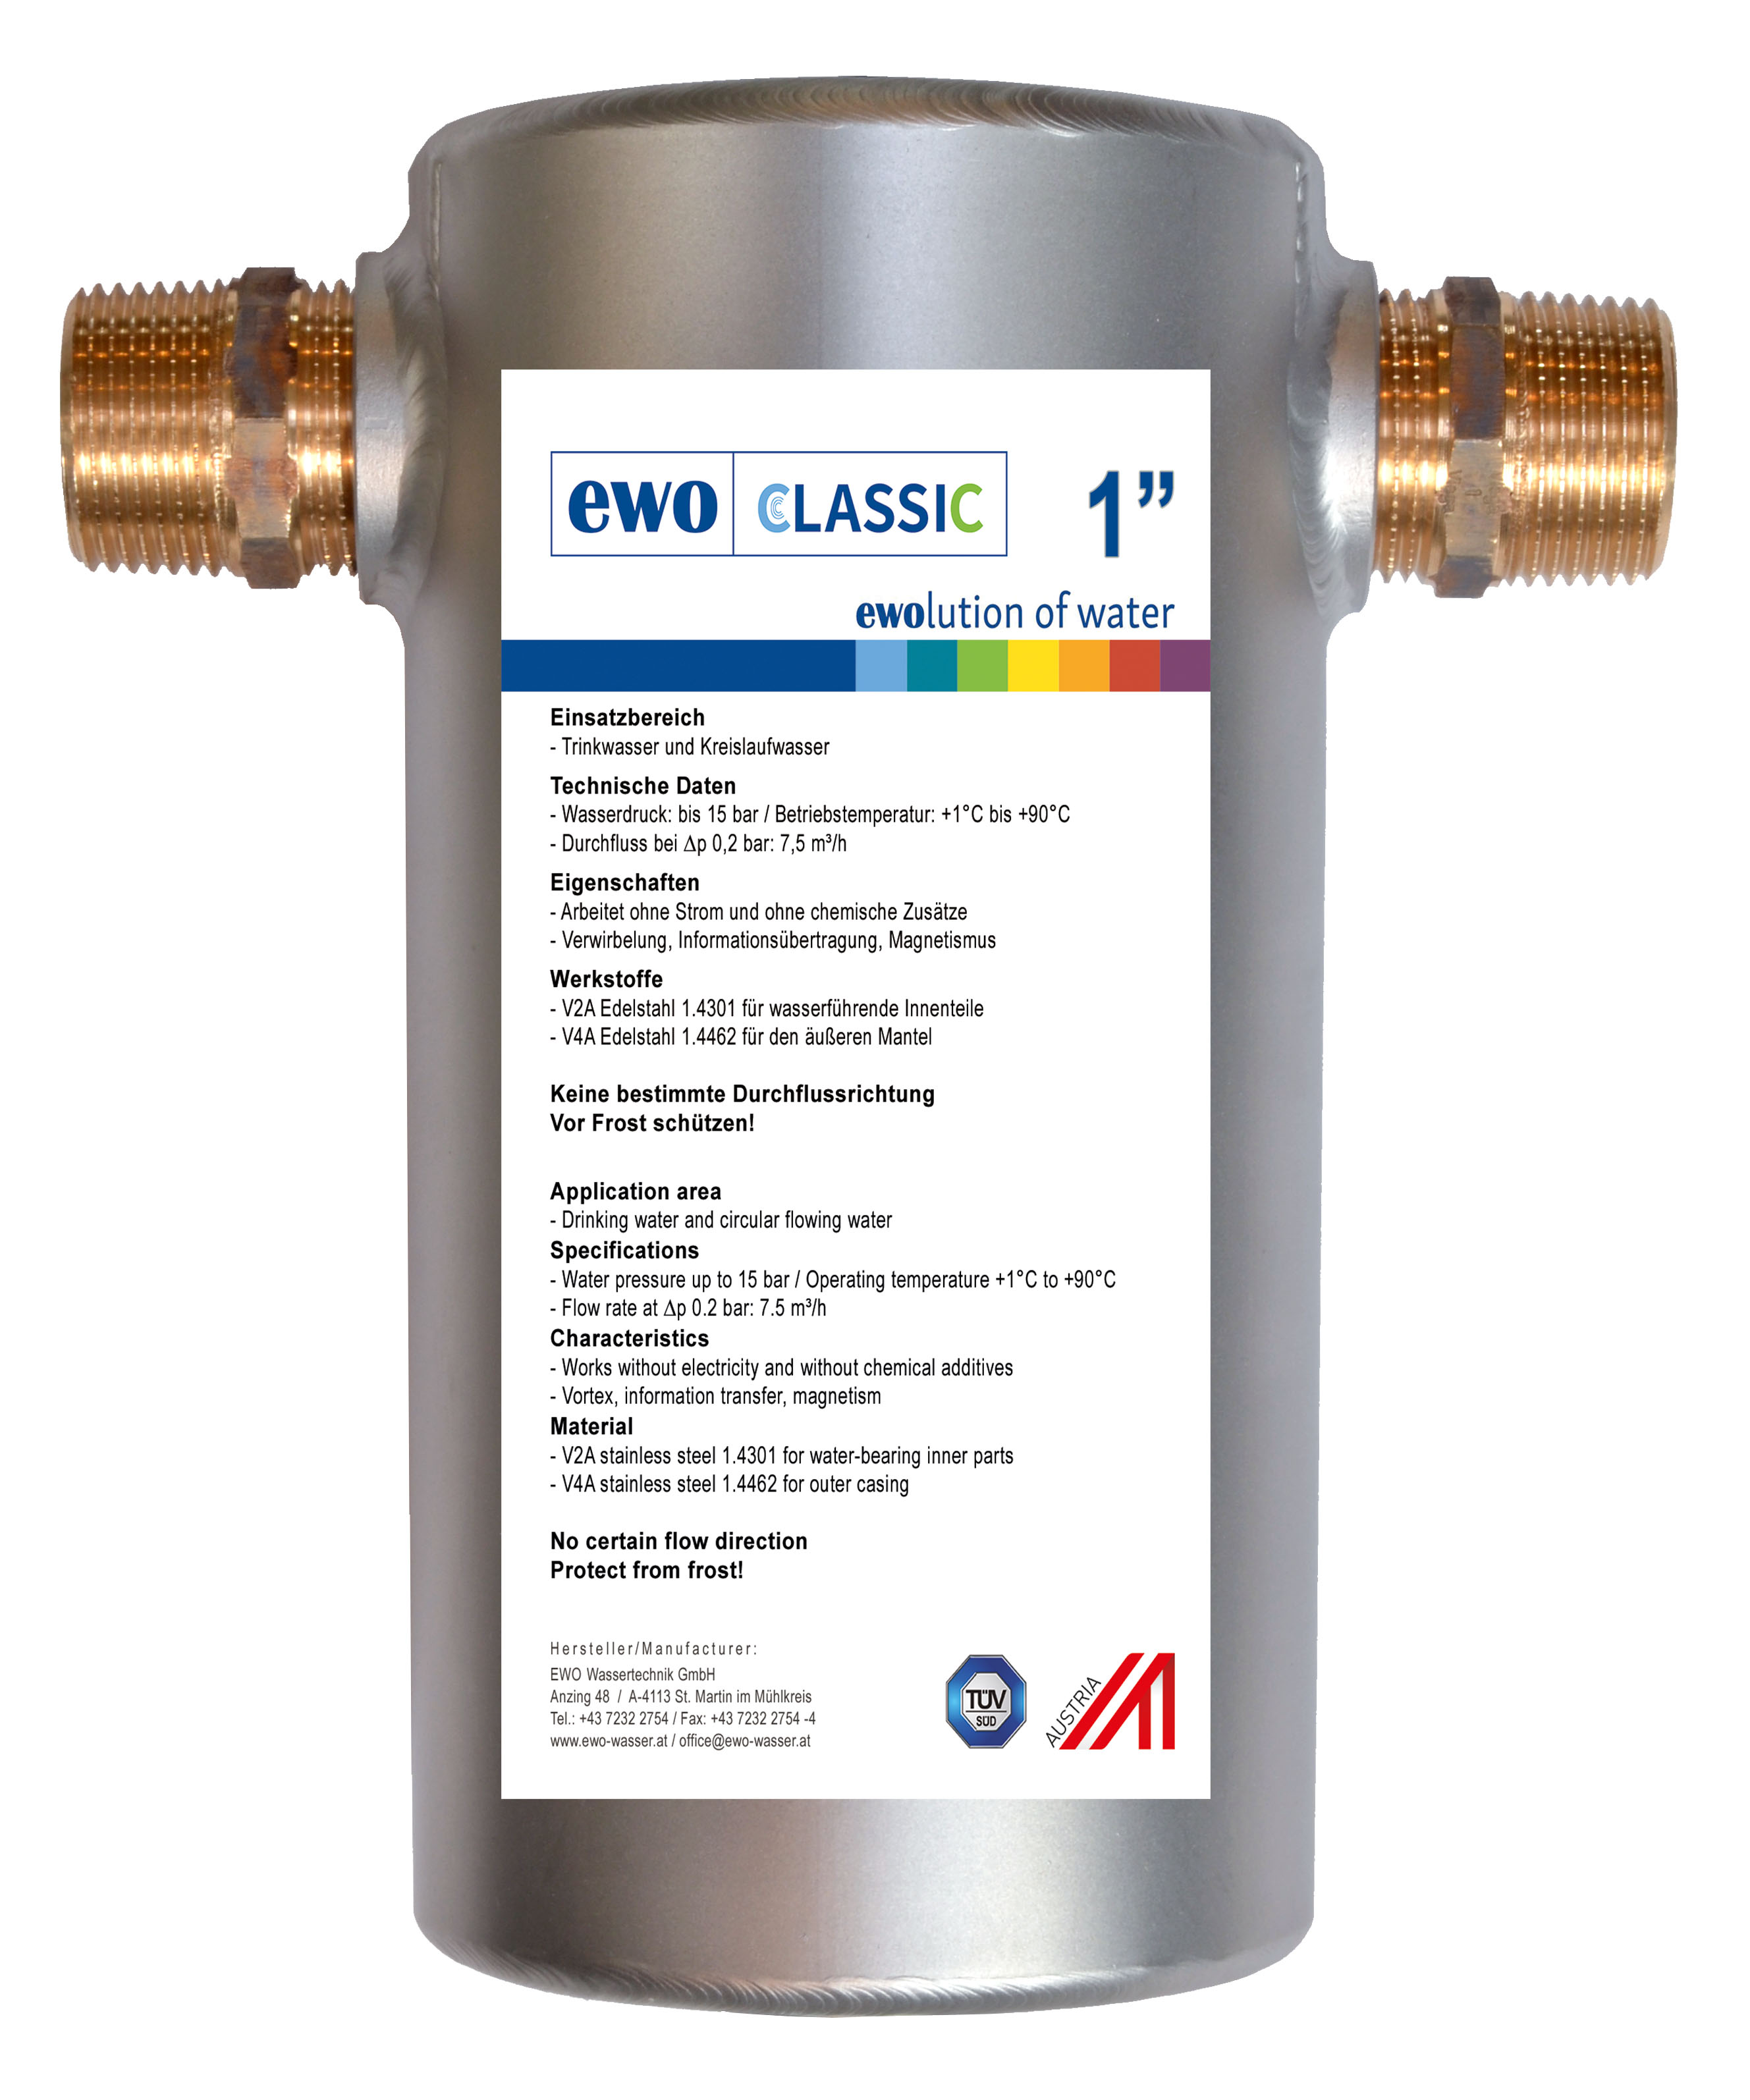 EWO CLASSIC 3/8“ – 6“ mounting instructions